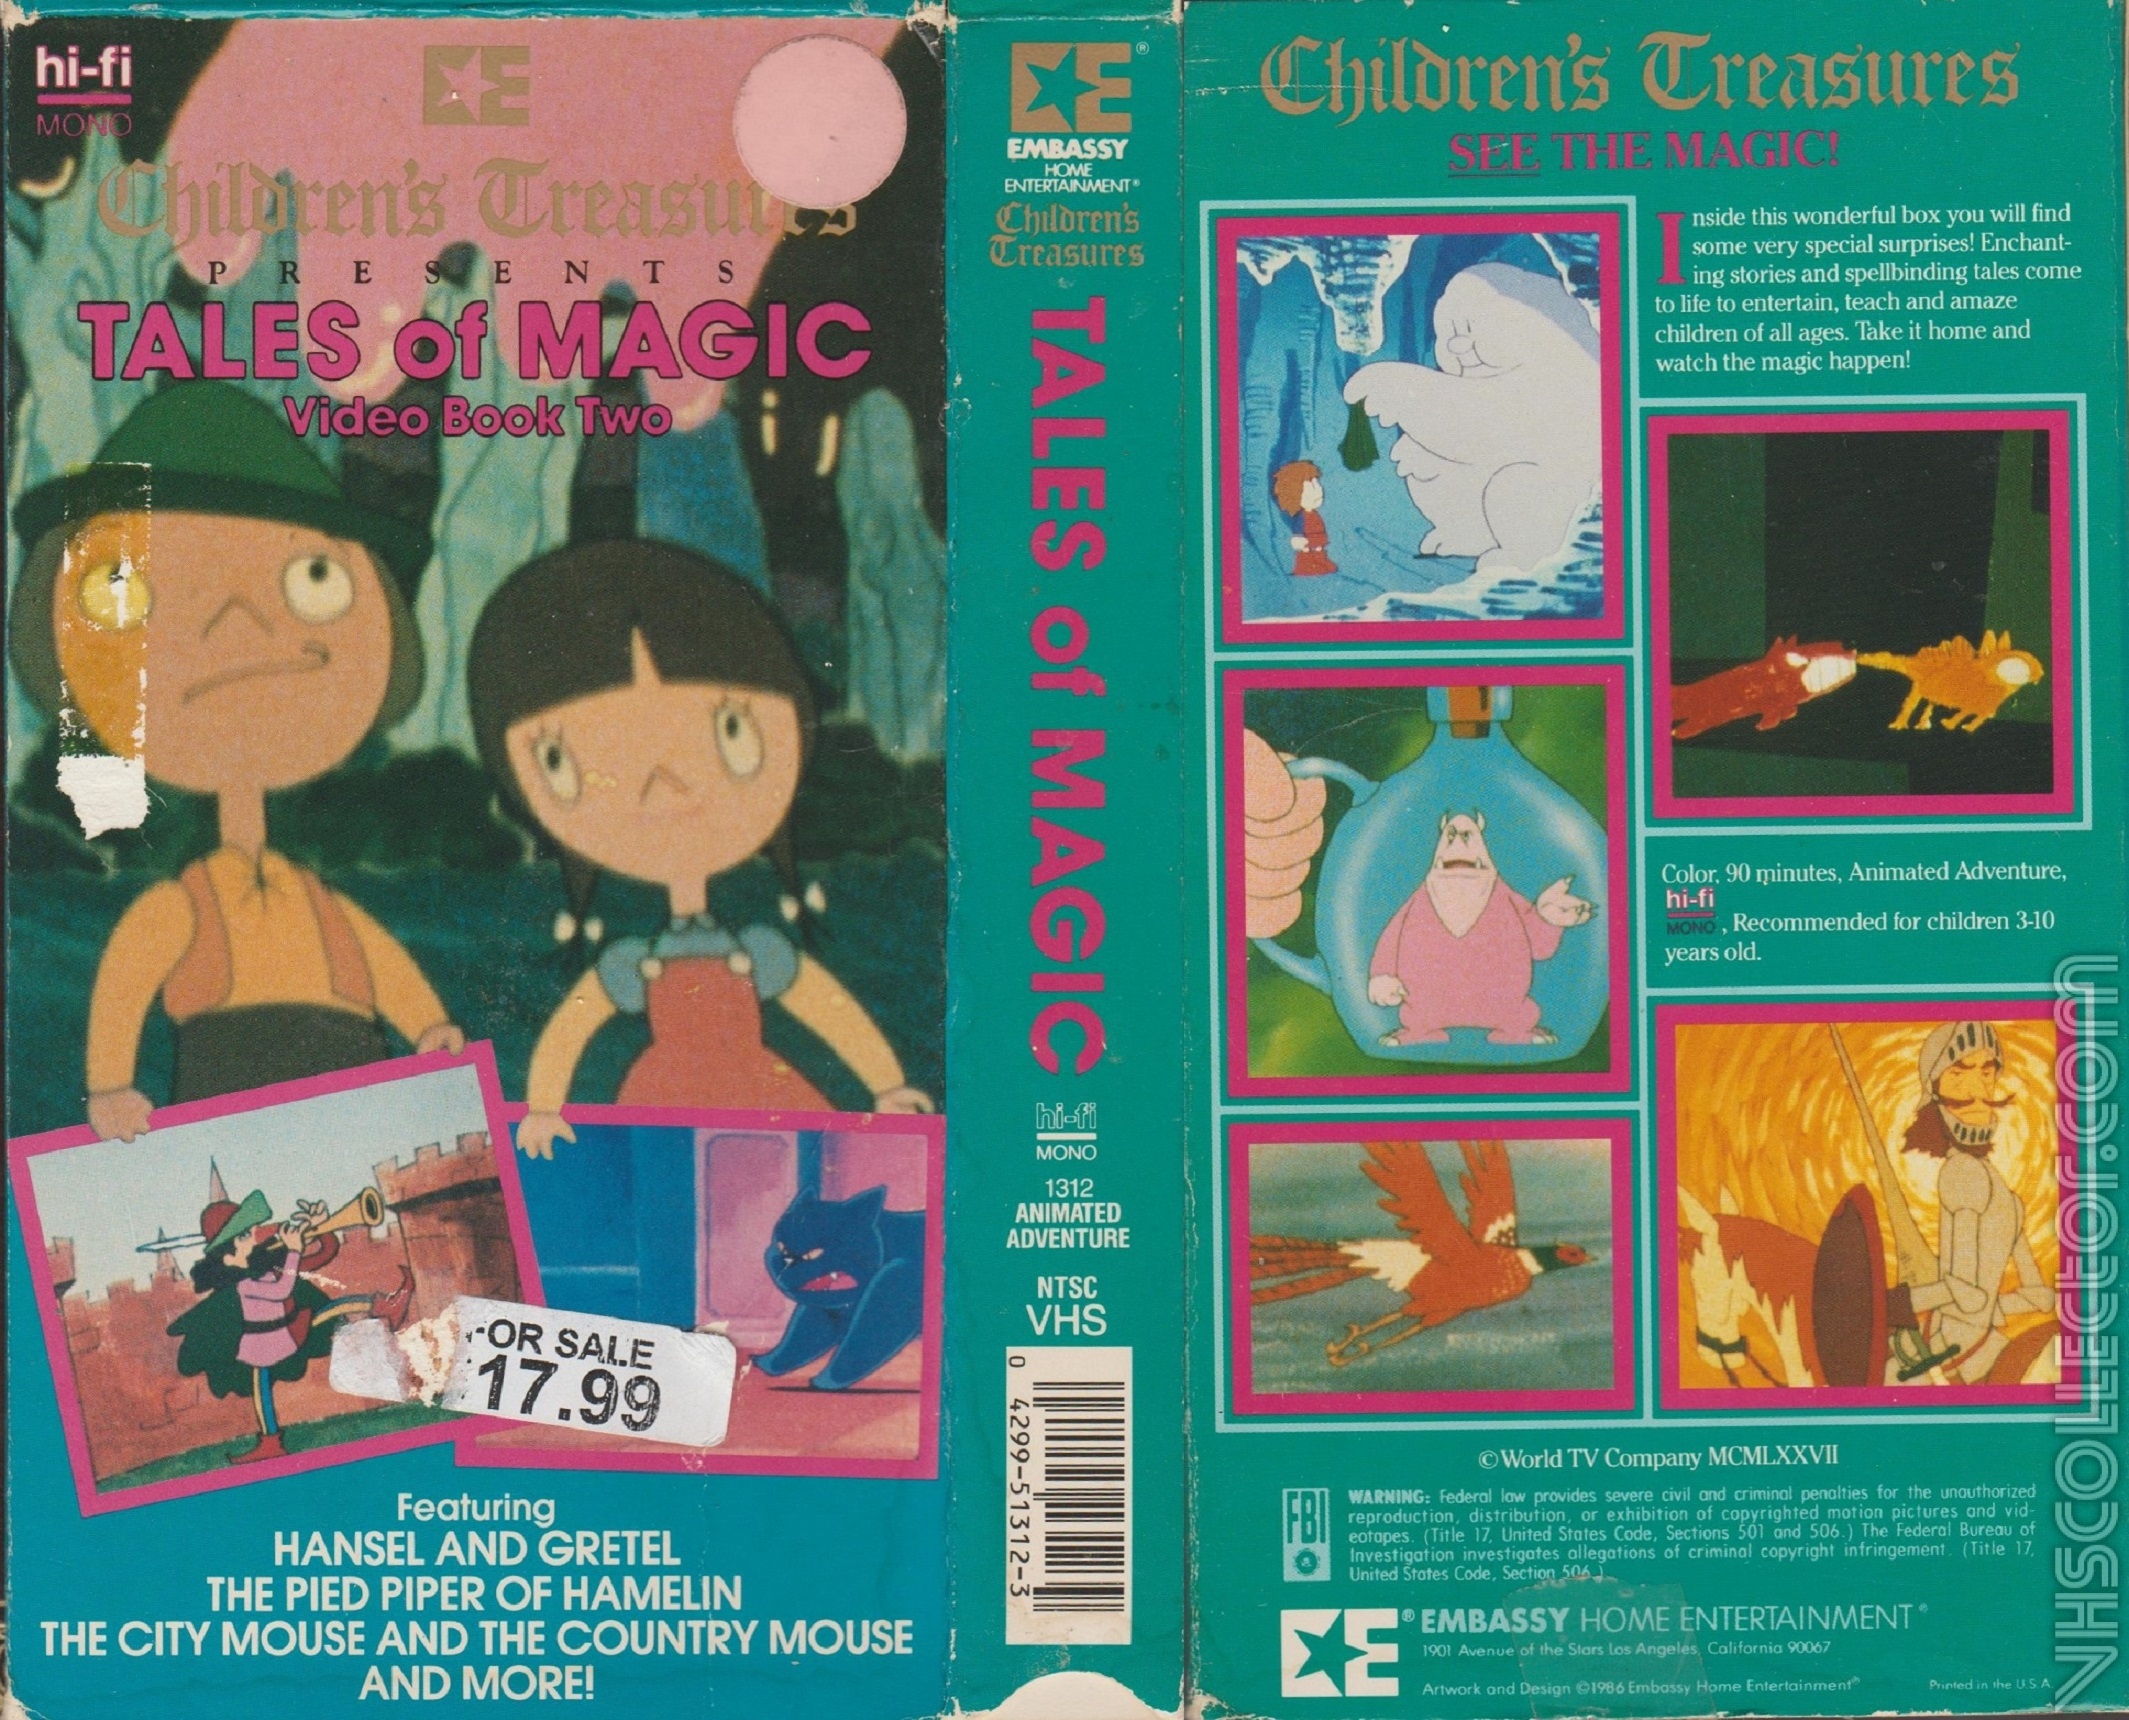 Tales of Magic (Video Book Two) | VHSCollector.com